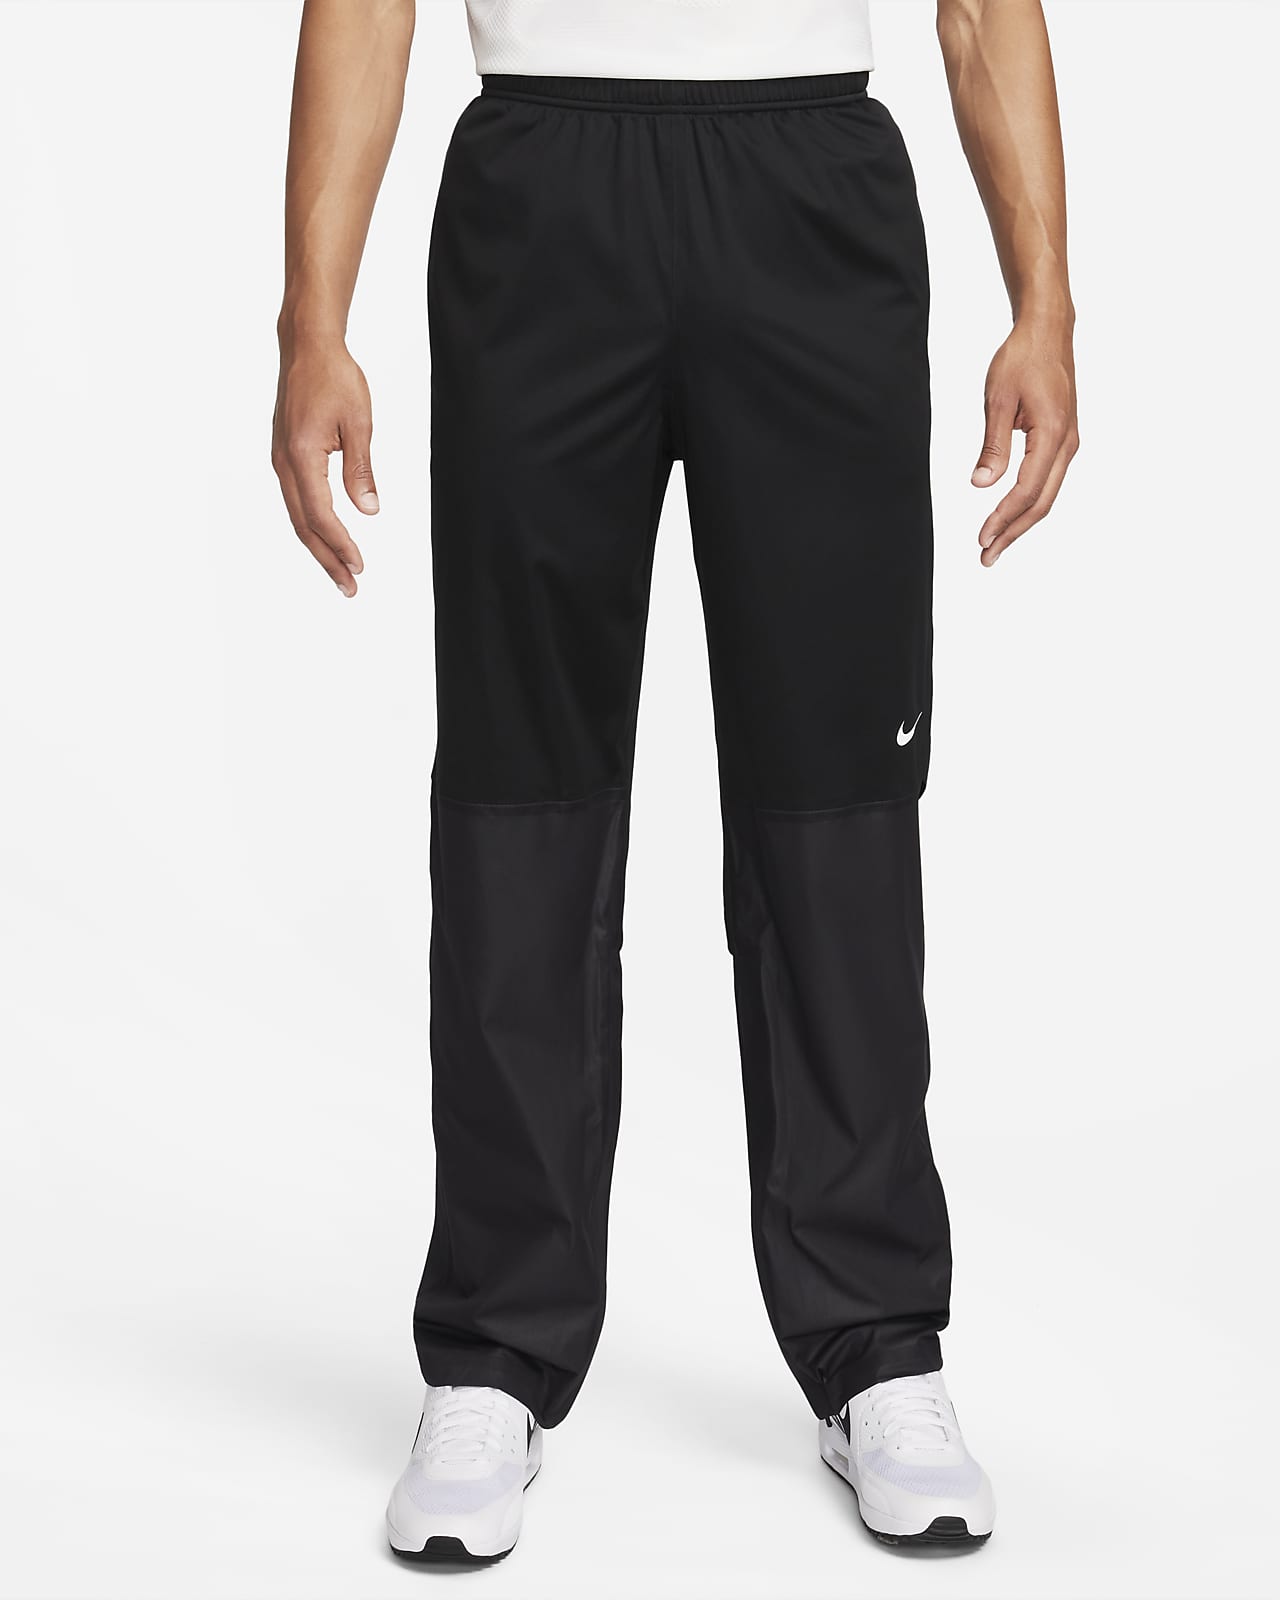 Storm-FIT Running Pant | Nike | Playmakers